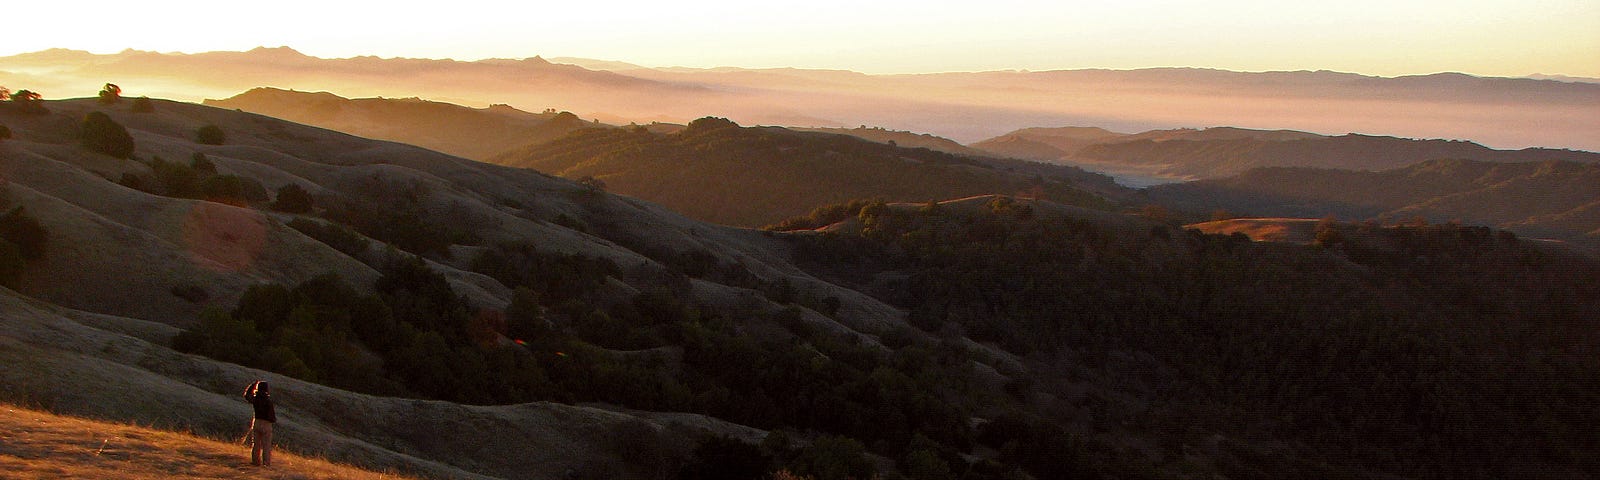 Dawn upon Henry Coe State Park, CA 2013 by J.D. Grubb Photography